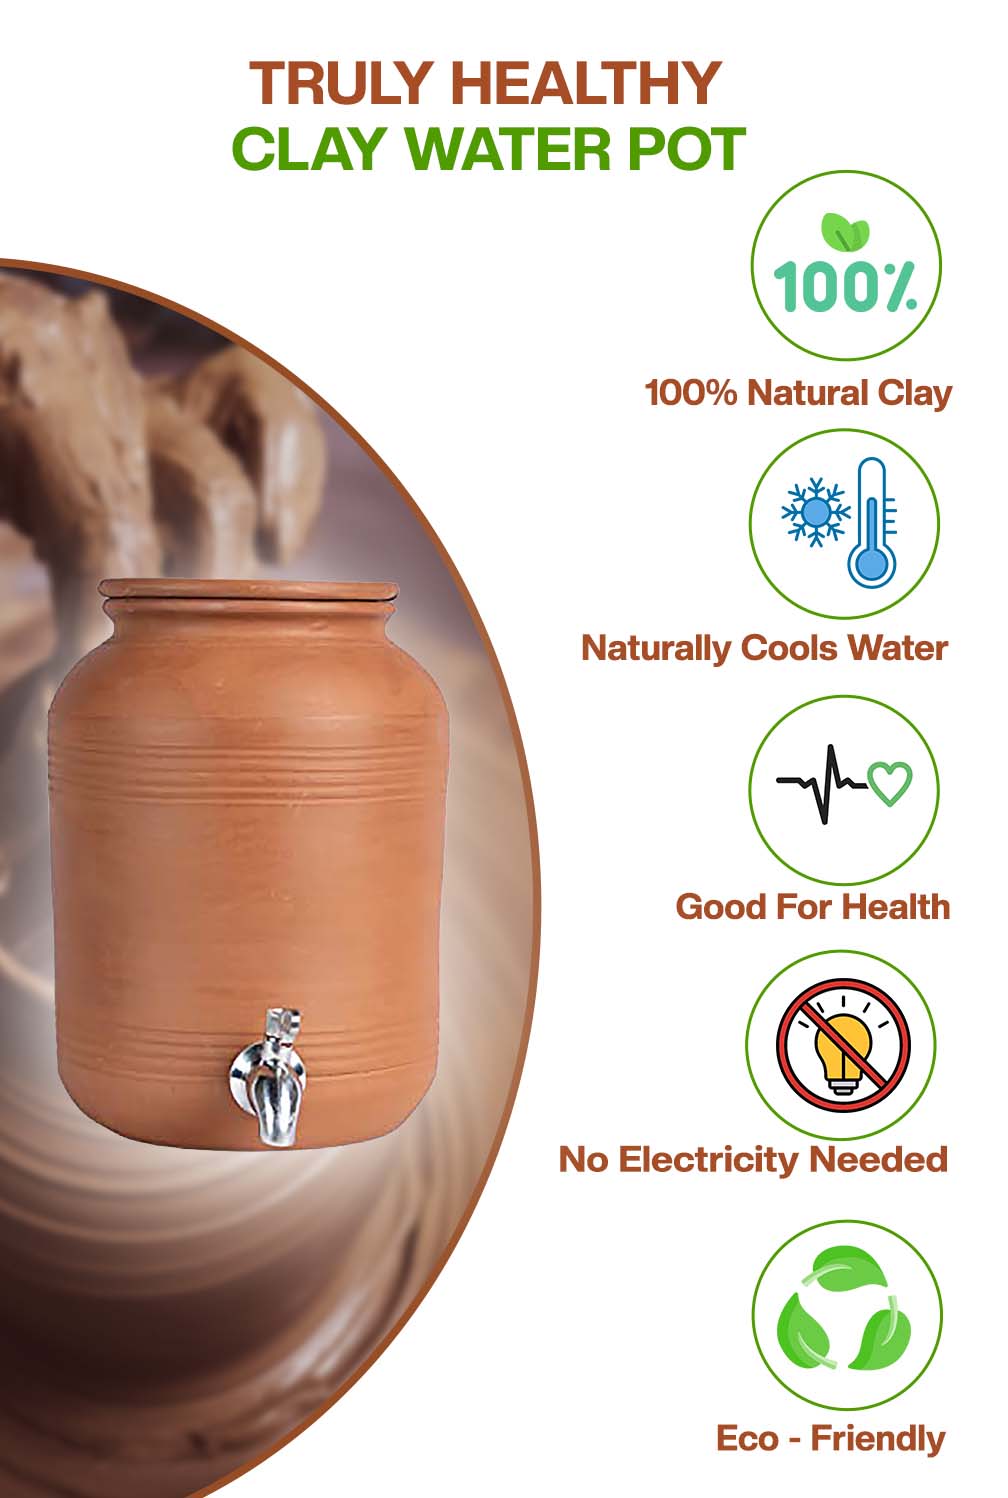 Earthen Clay water pot with Lid & tap - 202.8oz